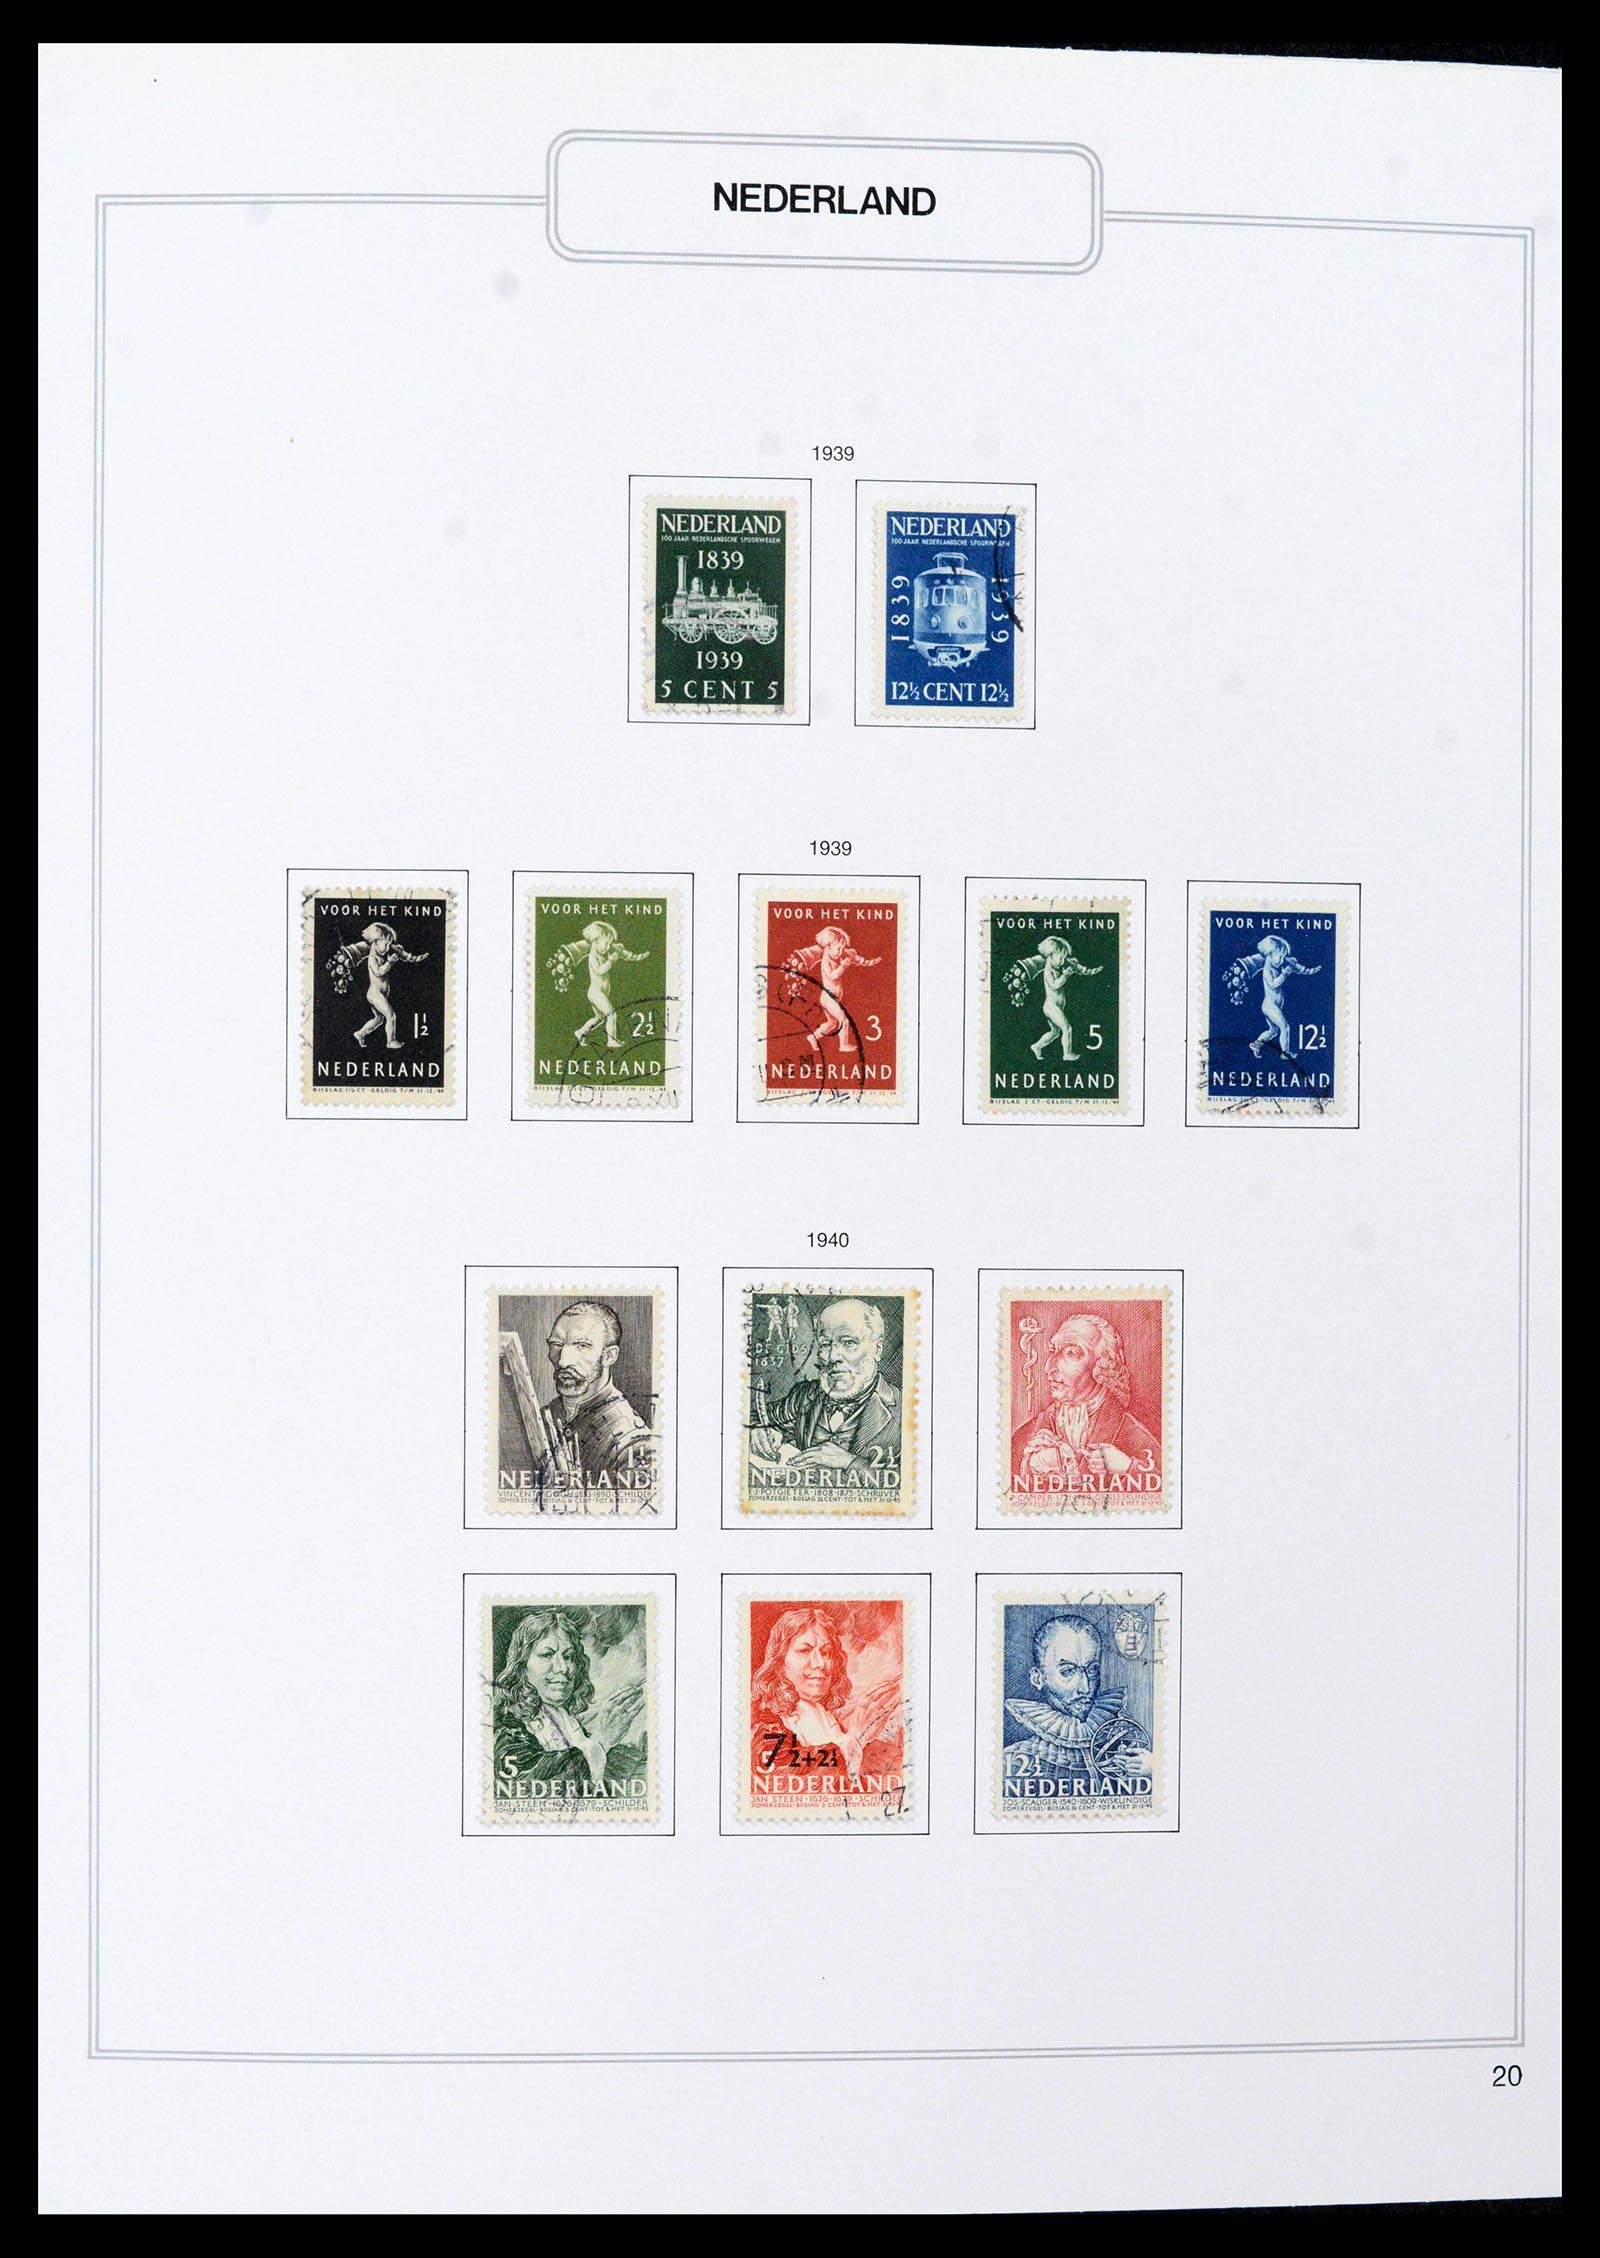 39261 0020 - Stamp collection 39261 Netherlands 1852-2015.